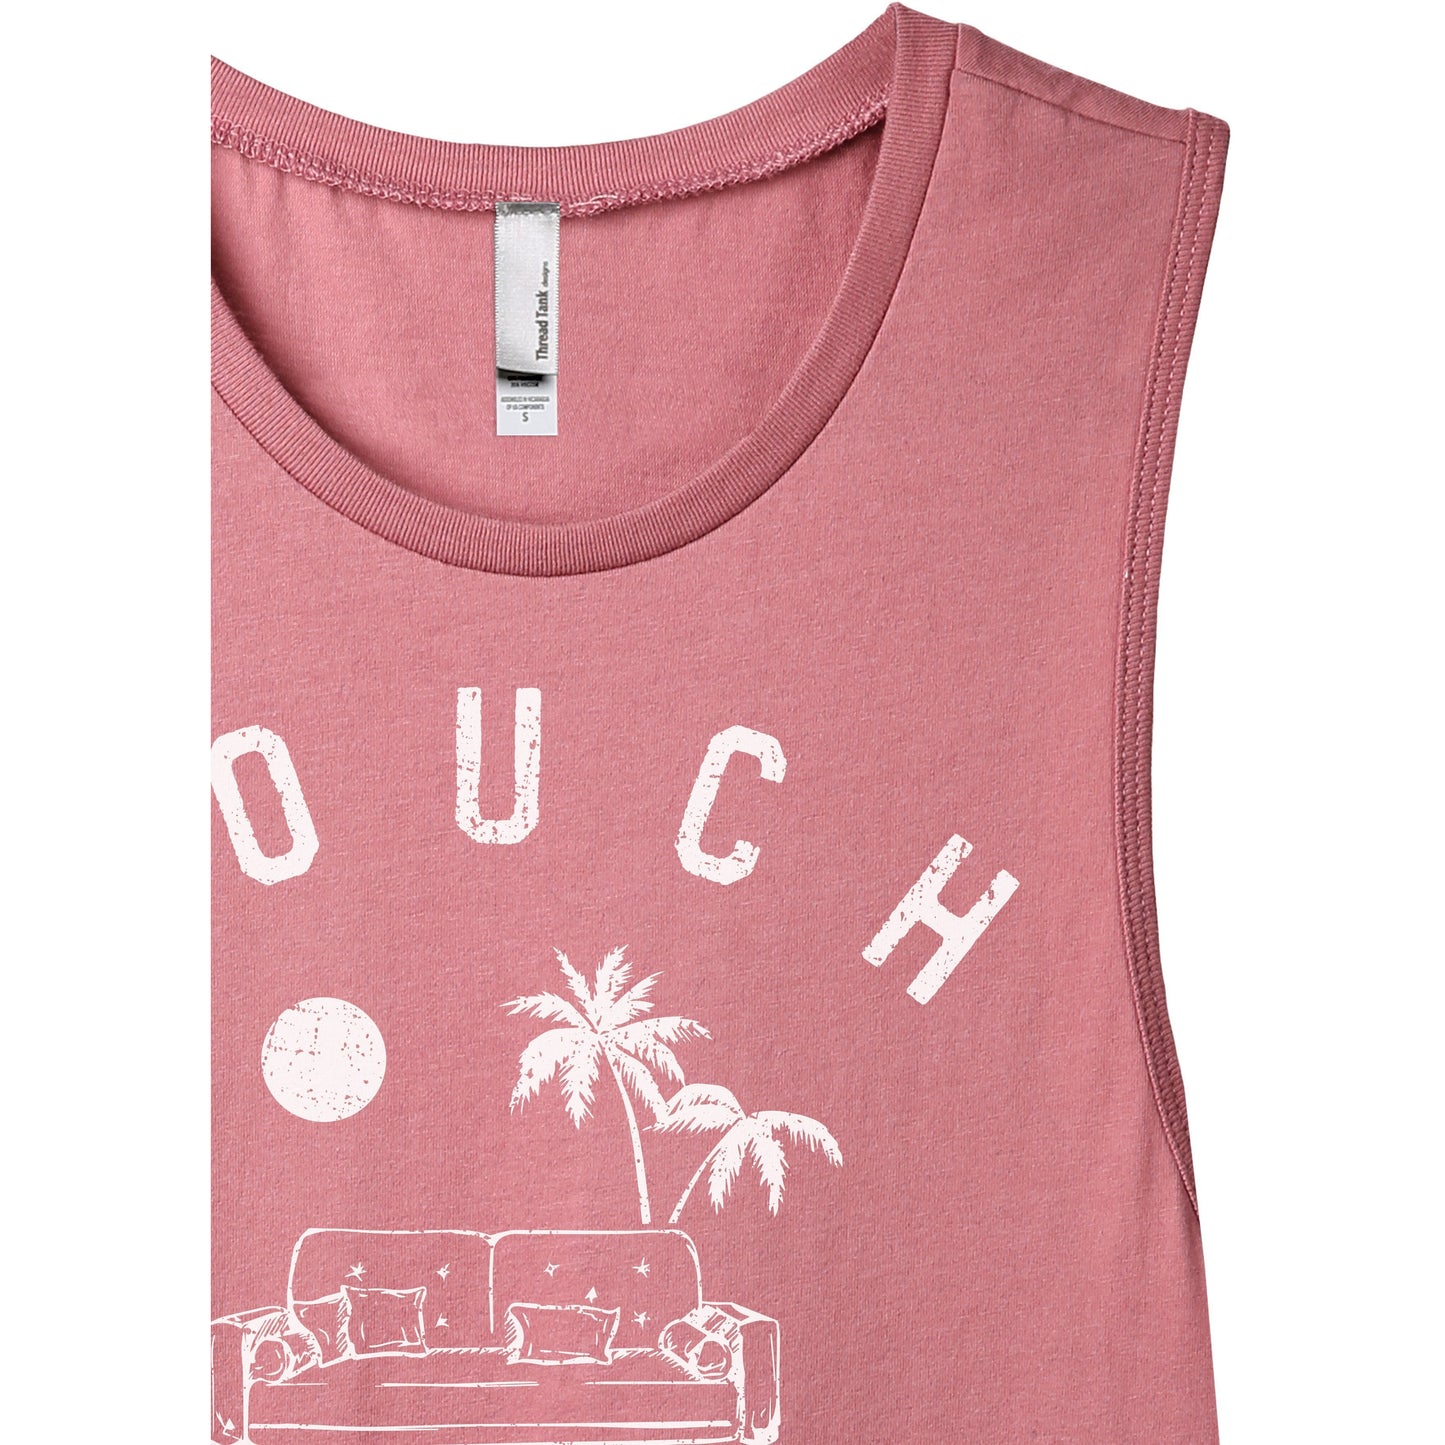 Couch Spring Break Women's Relaxed Muscle Tank Tee Rouge Closeup Details
